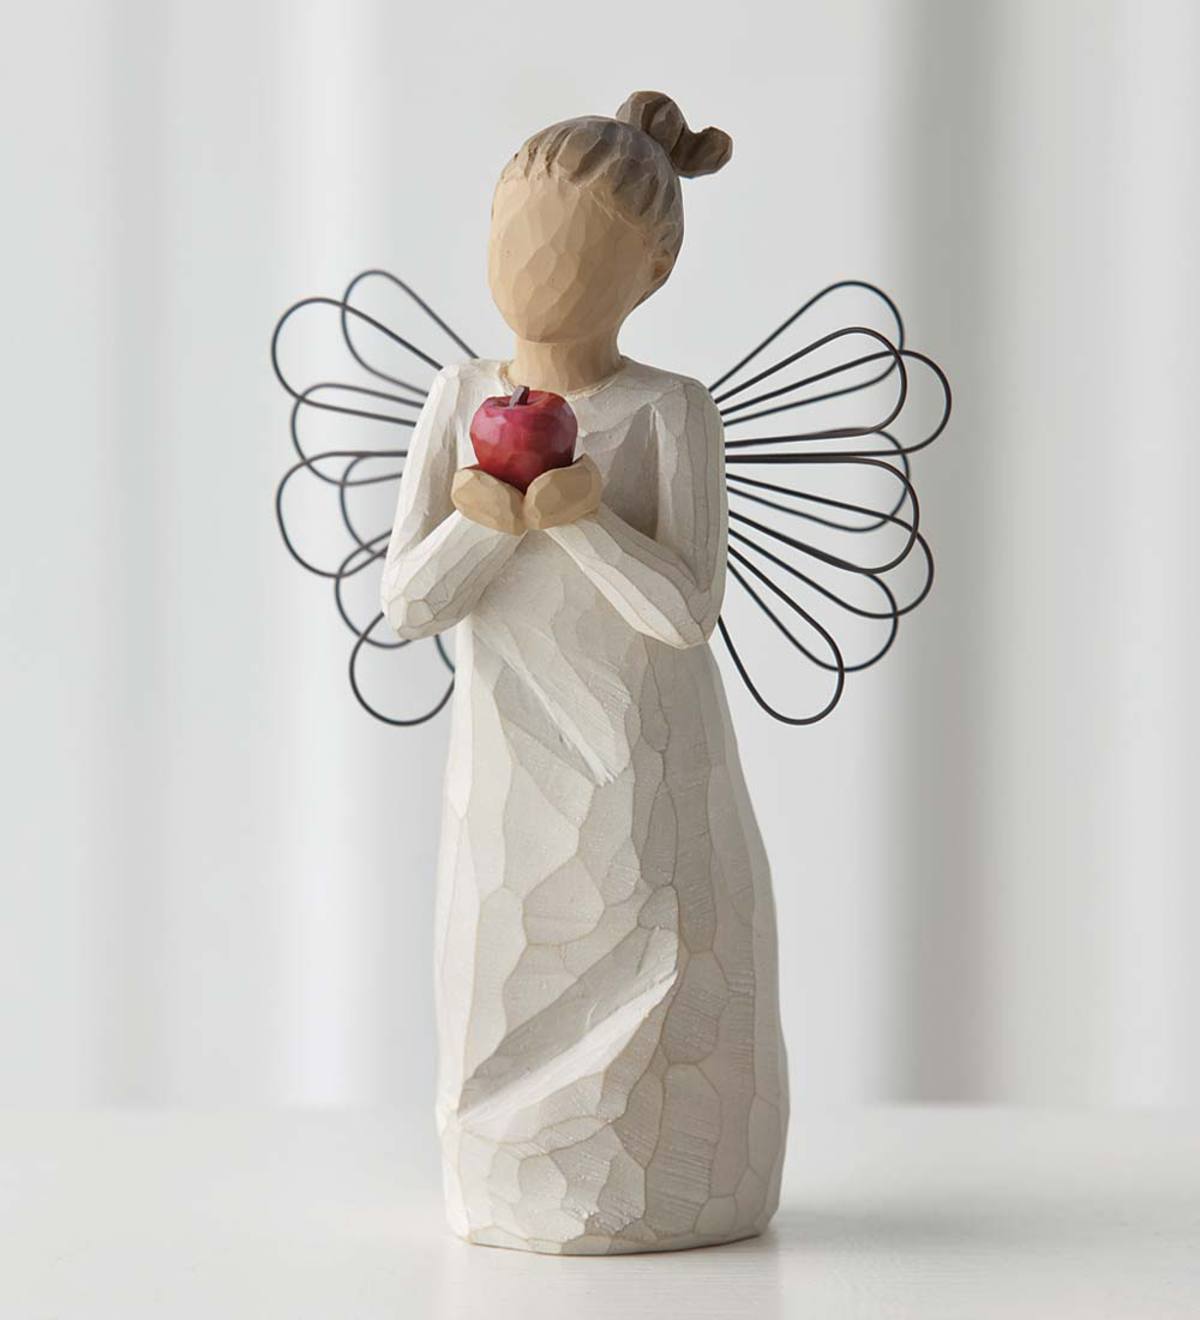 Willow Tree "You're the Best" Figurine